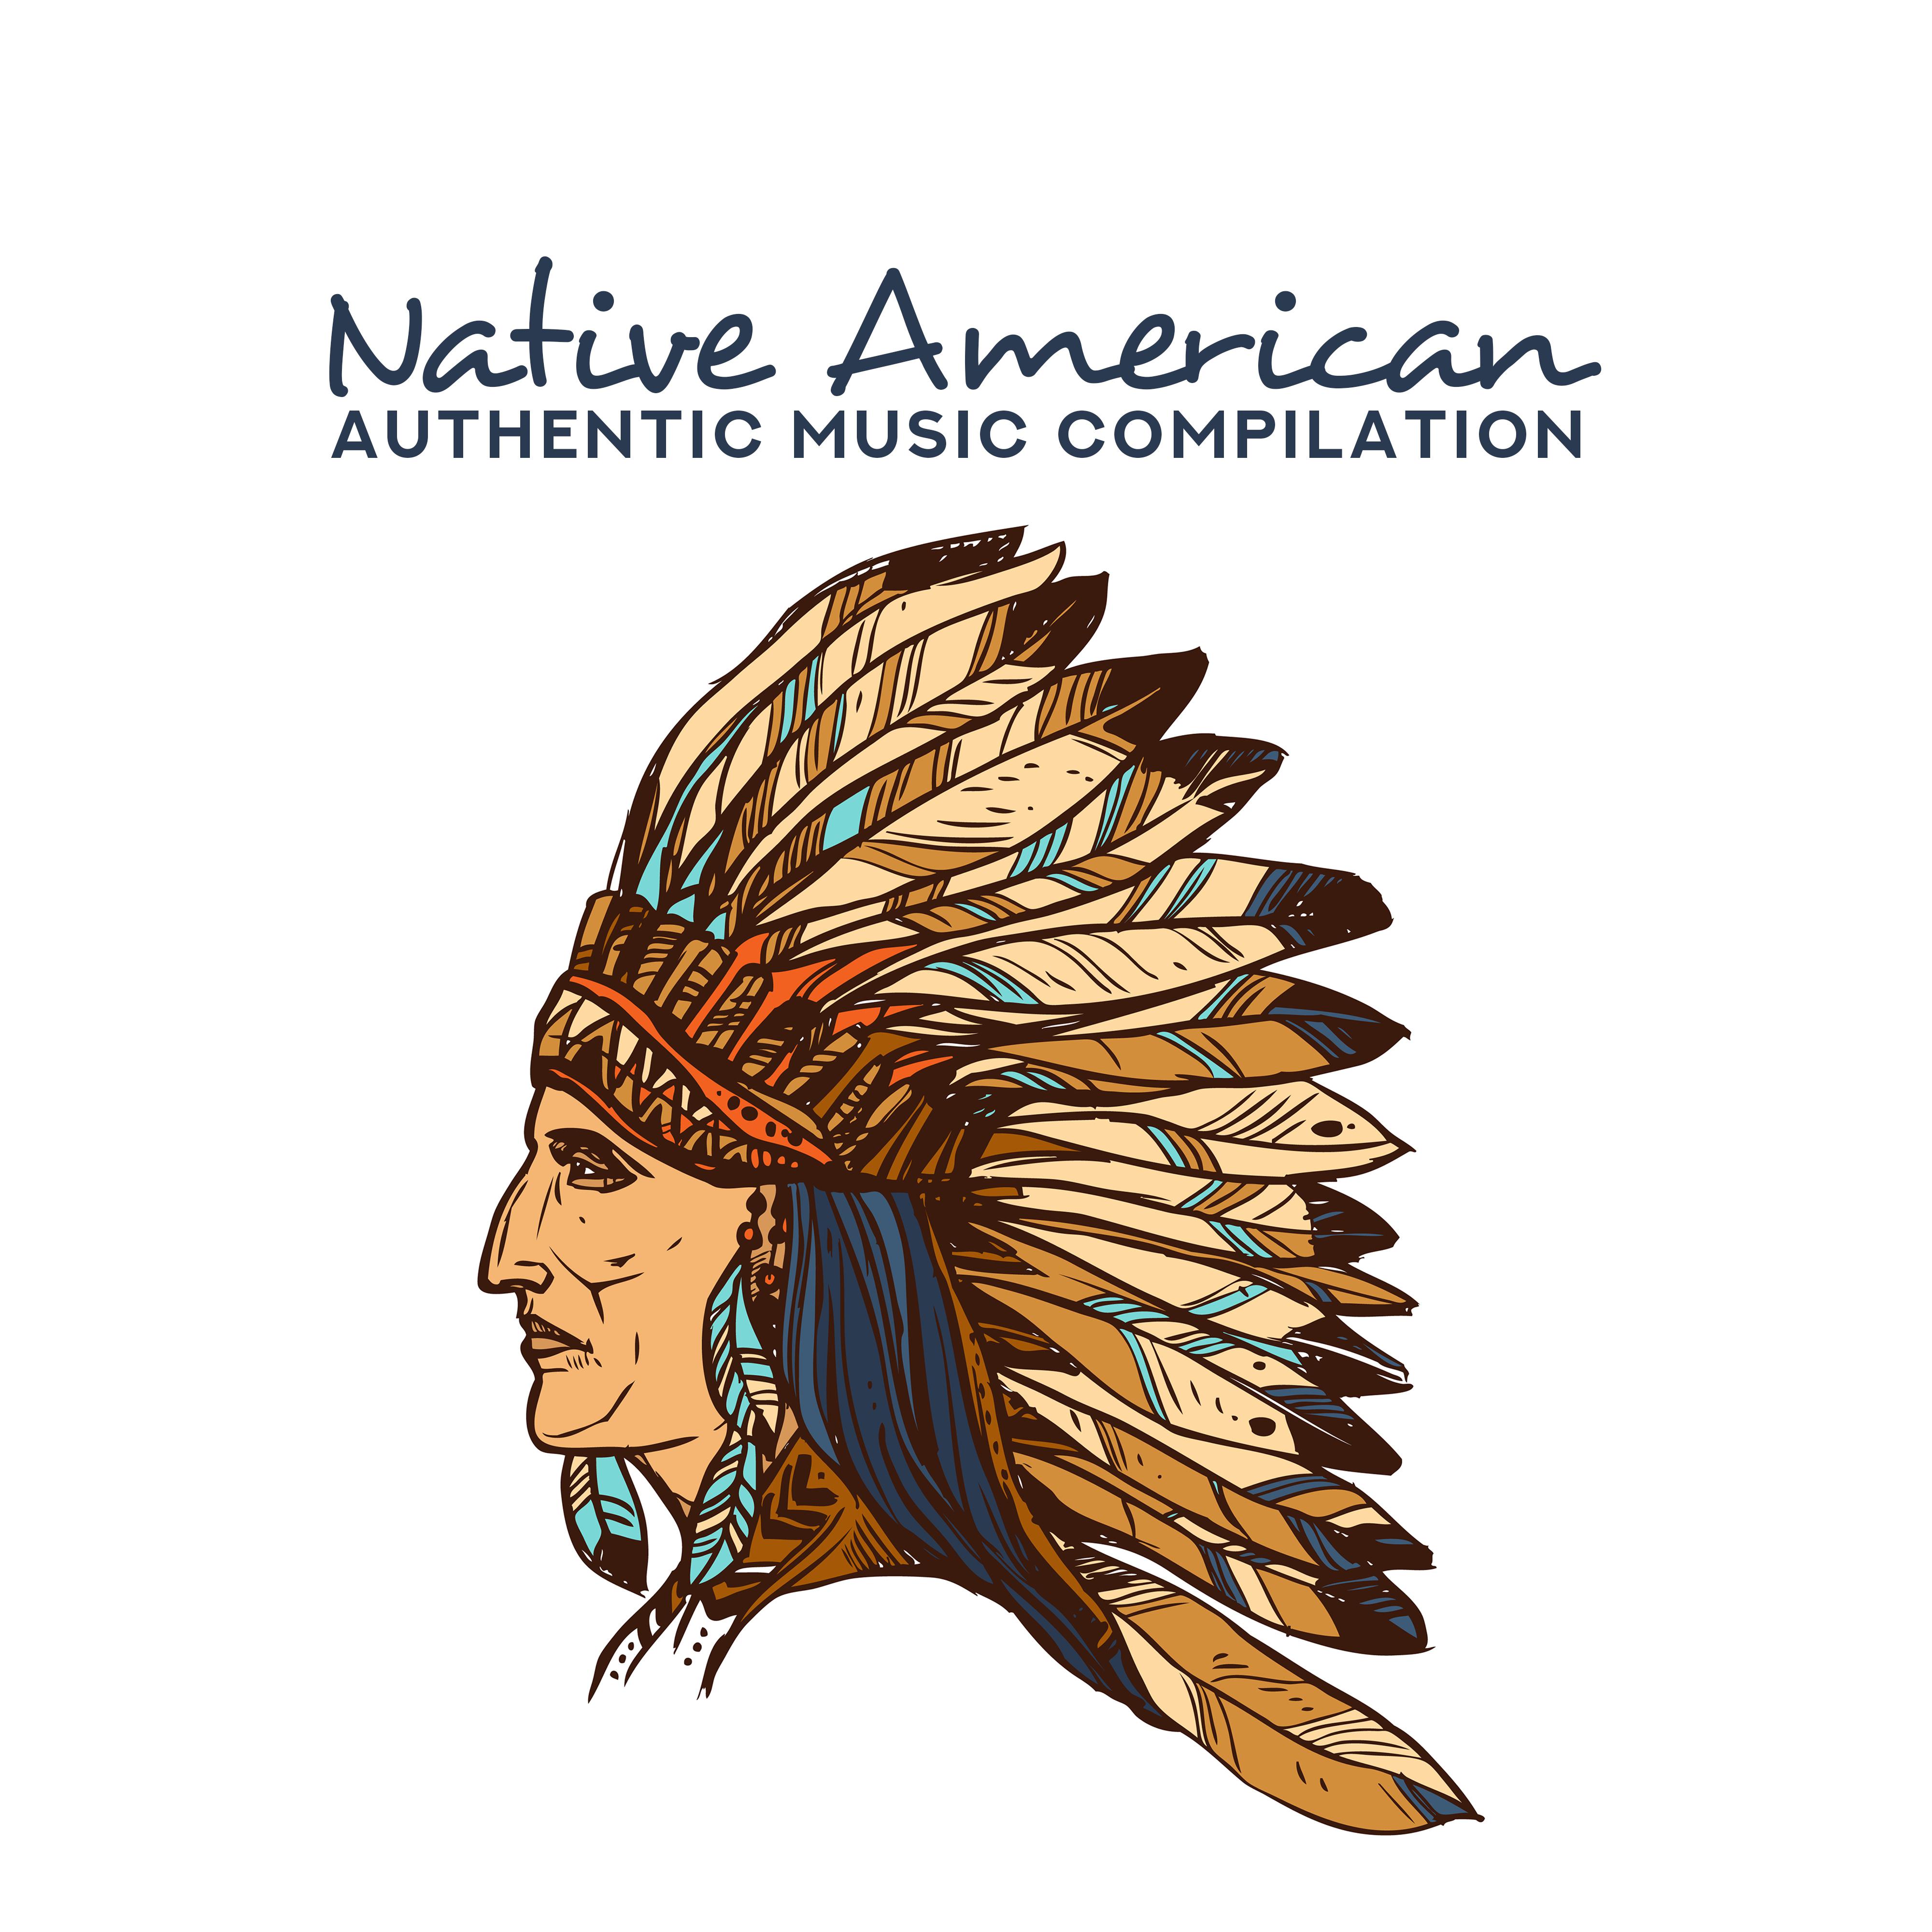 Native American Authentic Music Compilation: New Age Shamanic Melodies for Spirit Rituals, Meditation, Yoga Training, Full Relax & Good Sleep, Sounds of Flutes, Drums & Nature